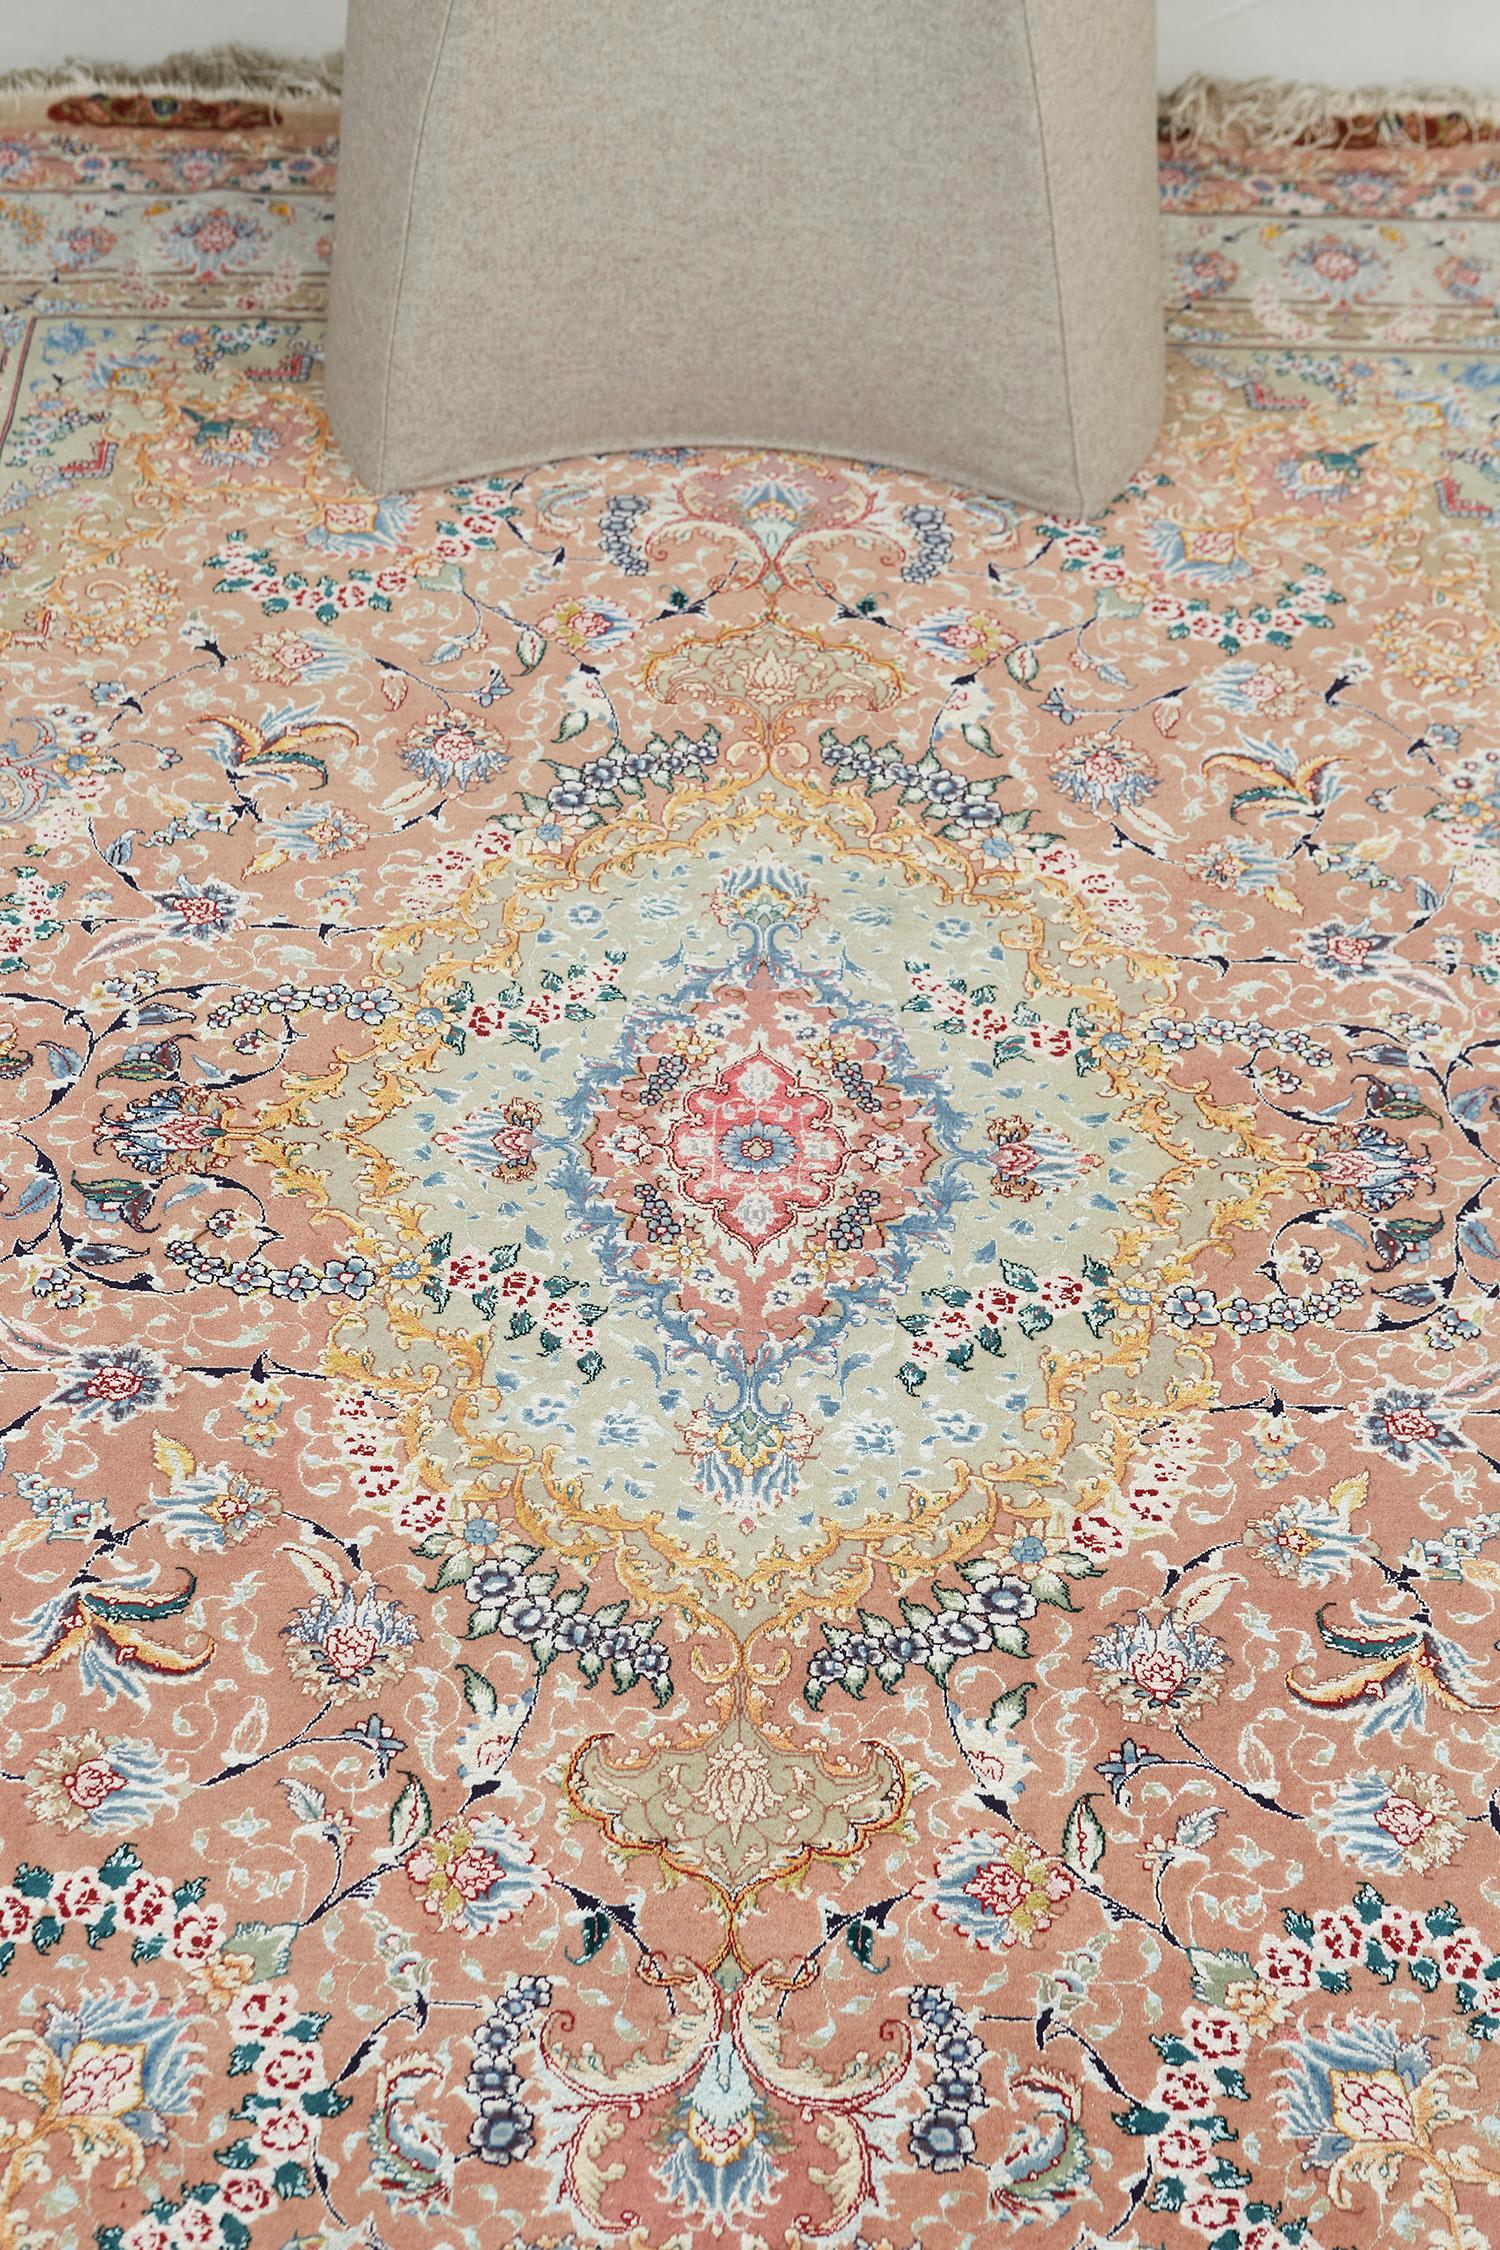 A vibrant Fine Persian Tabriz rug features all the blooming elements that intensify into a multi-colored field. The main border contains an all-over lattice of issuing split leaves, mini palmettes, and a delicate flowering vinery that makes the rug